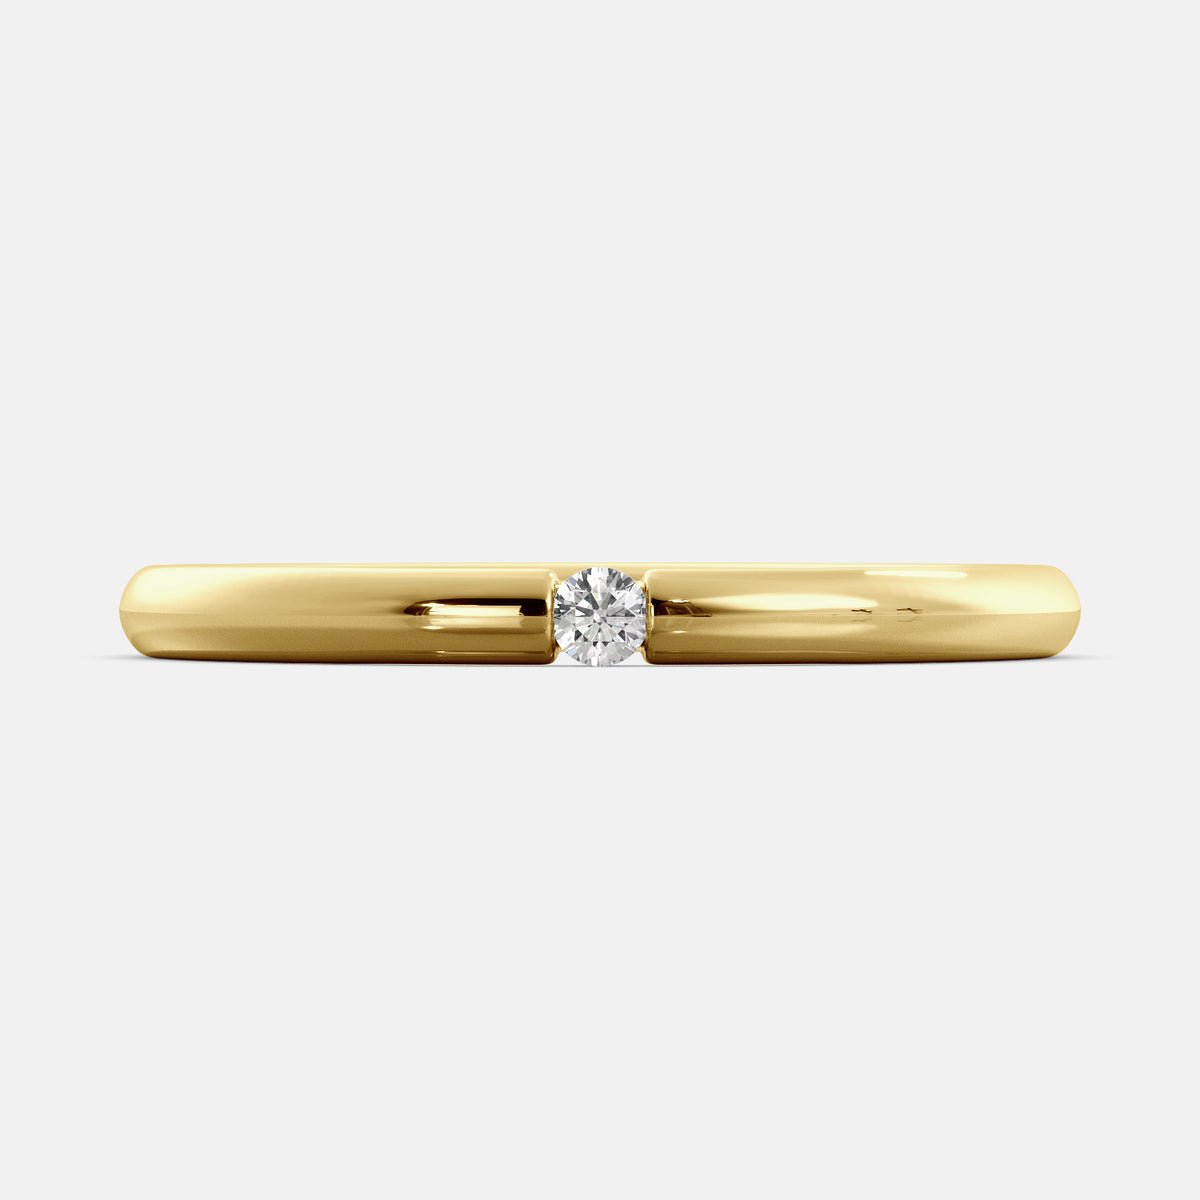 A close-up of a simple round wedding band in 14K yellow gold with a small round diamond in the center. The band is a classic and timeless design that is perfect for any occasion. The diamond is a beautiful accent that adds a touch of glamour.